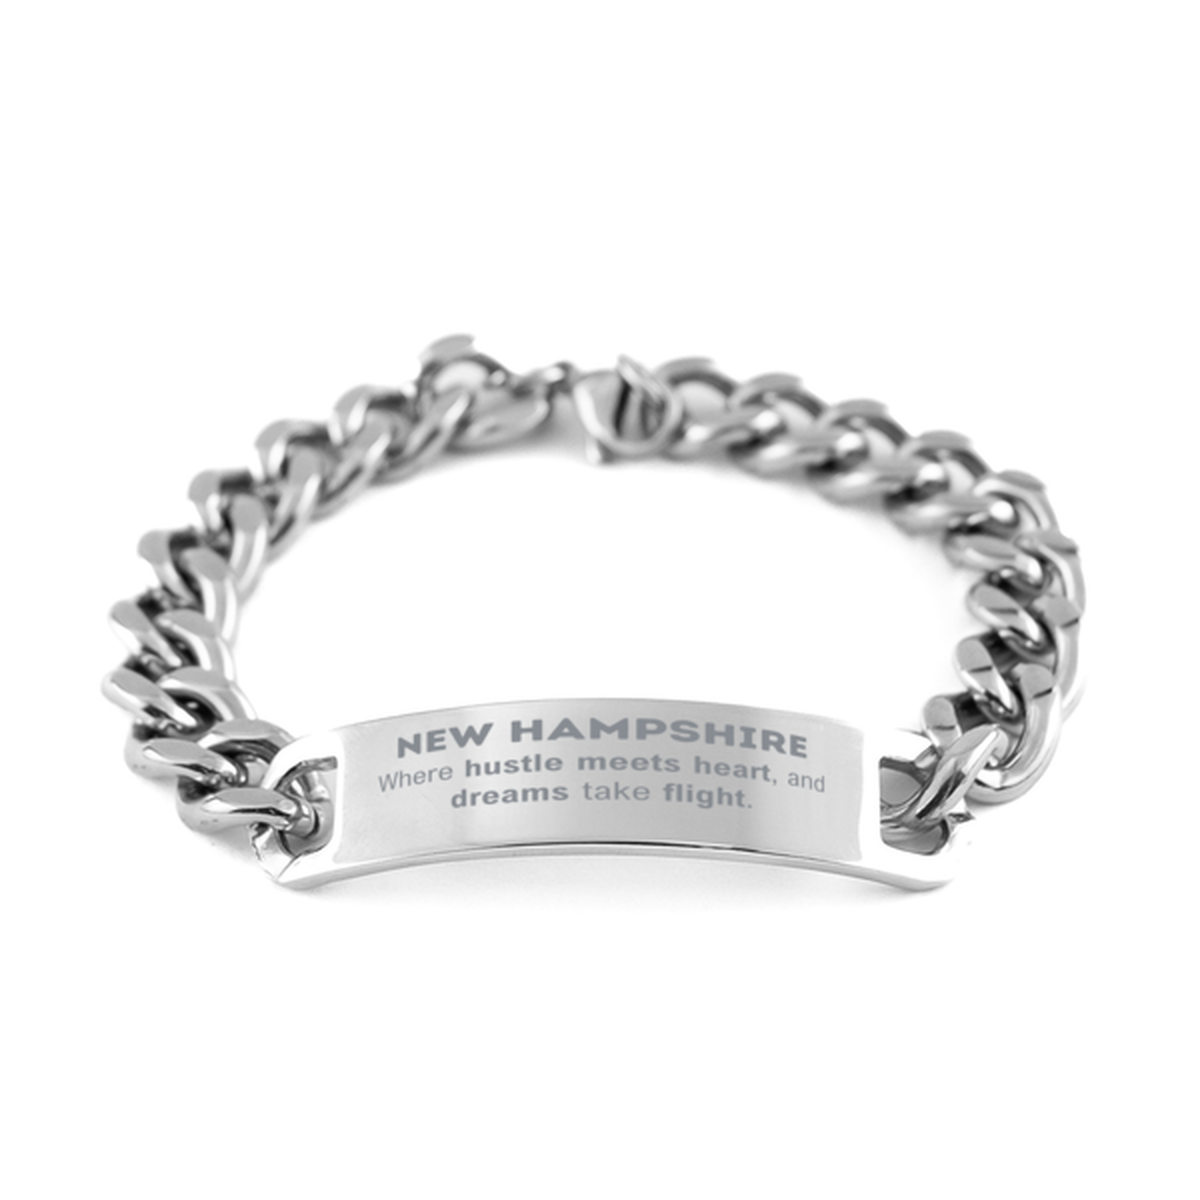 New Hampshire: Where hustle meets heart, and dreams take flight, New Hampshire Gifts, Proud New Hampshire Christmas Birthday New Hampshire Cuban Chain Stainless Steel Bracelet, New Hampshire State People, Men, Women, Friends